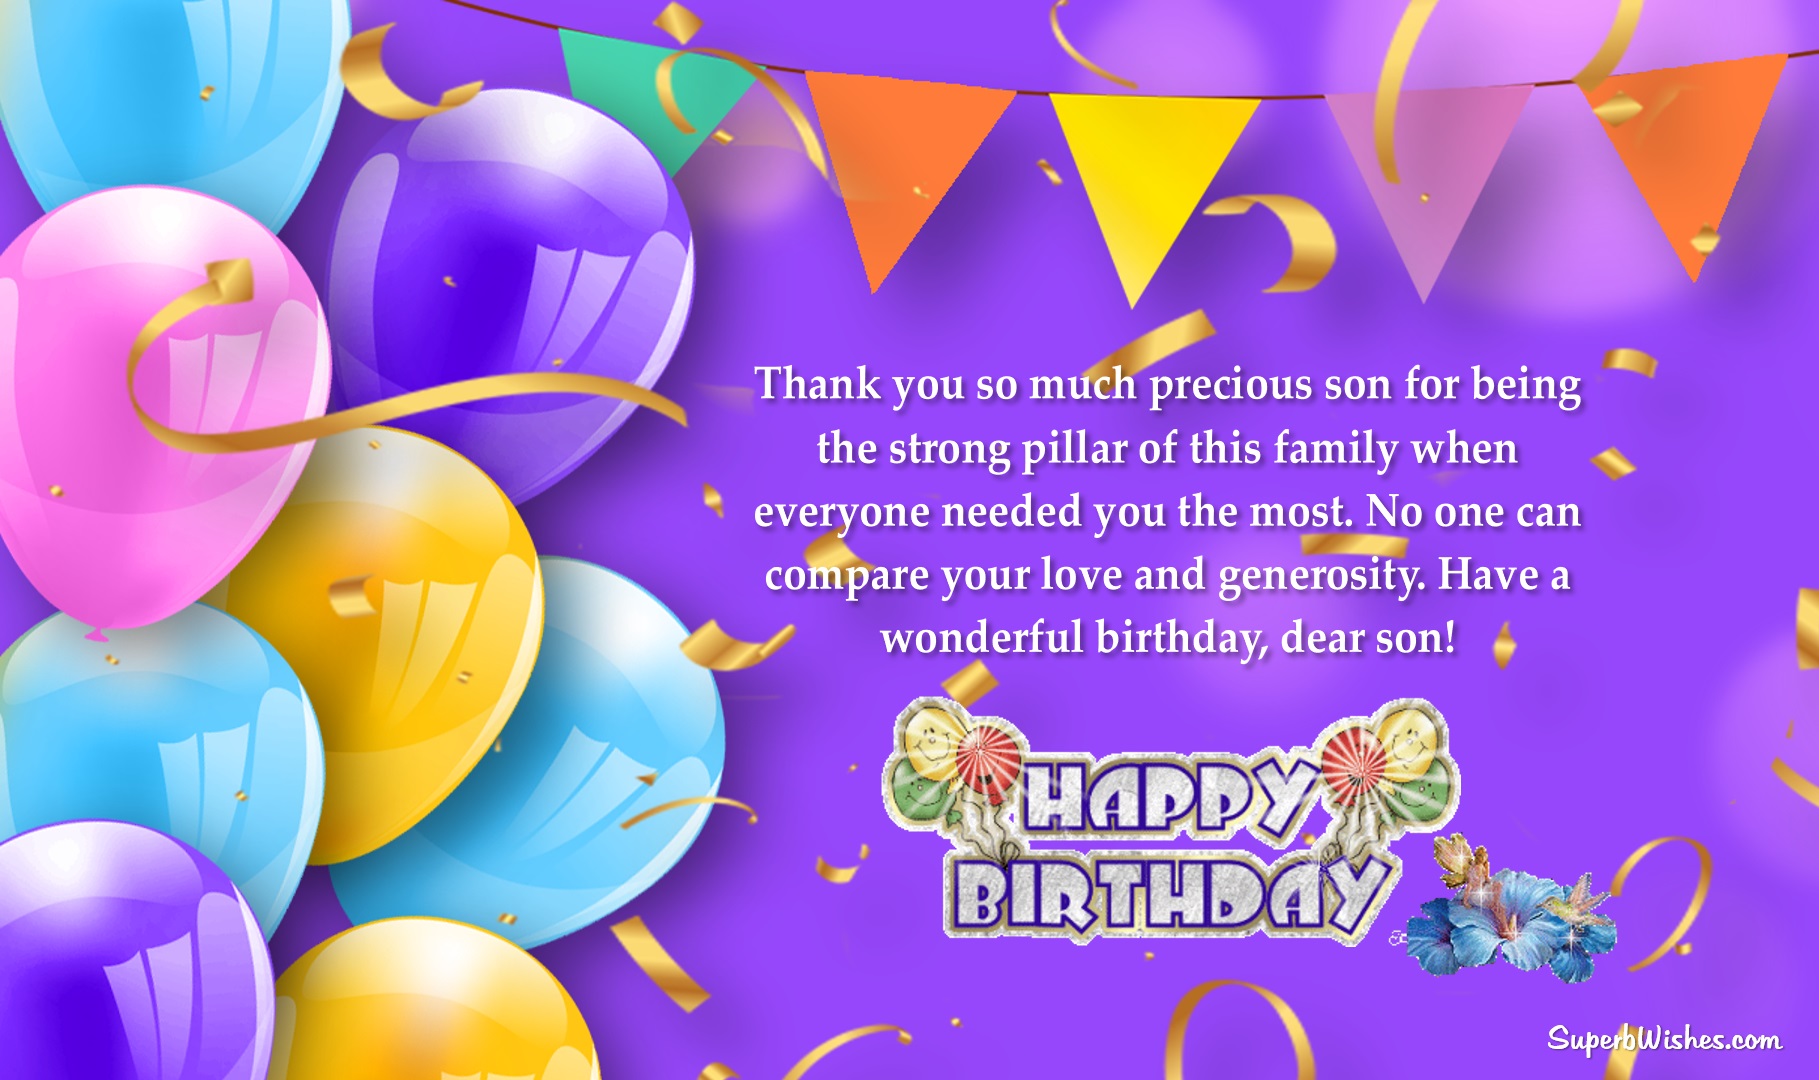 Free Birthday Wishes For Son Images. Superbwishes.com